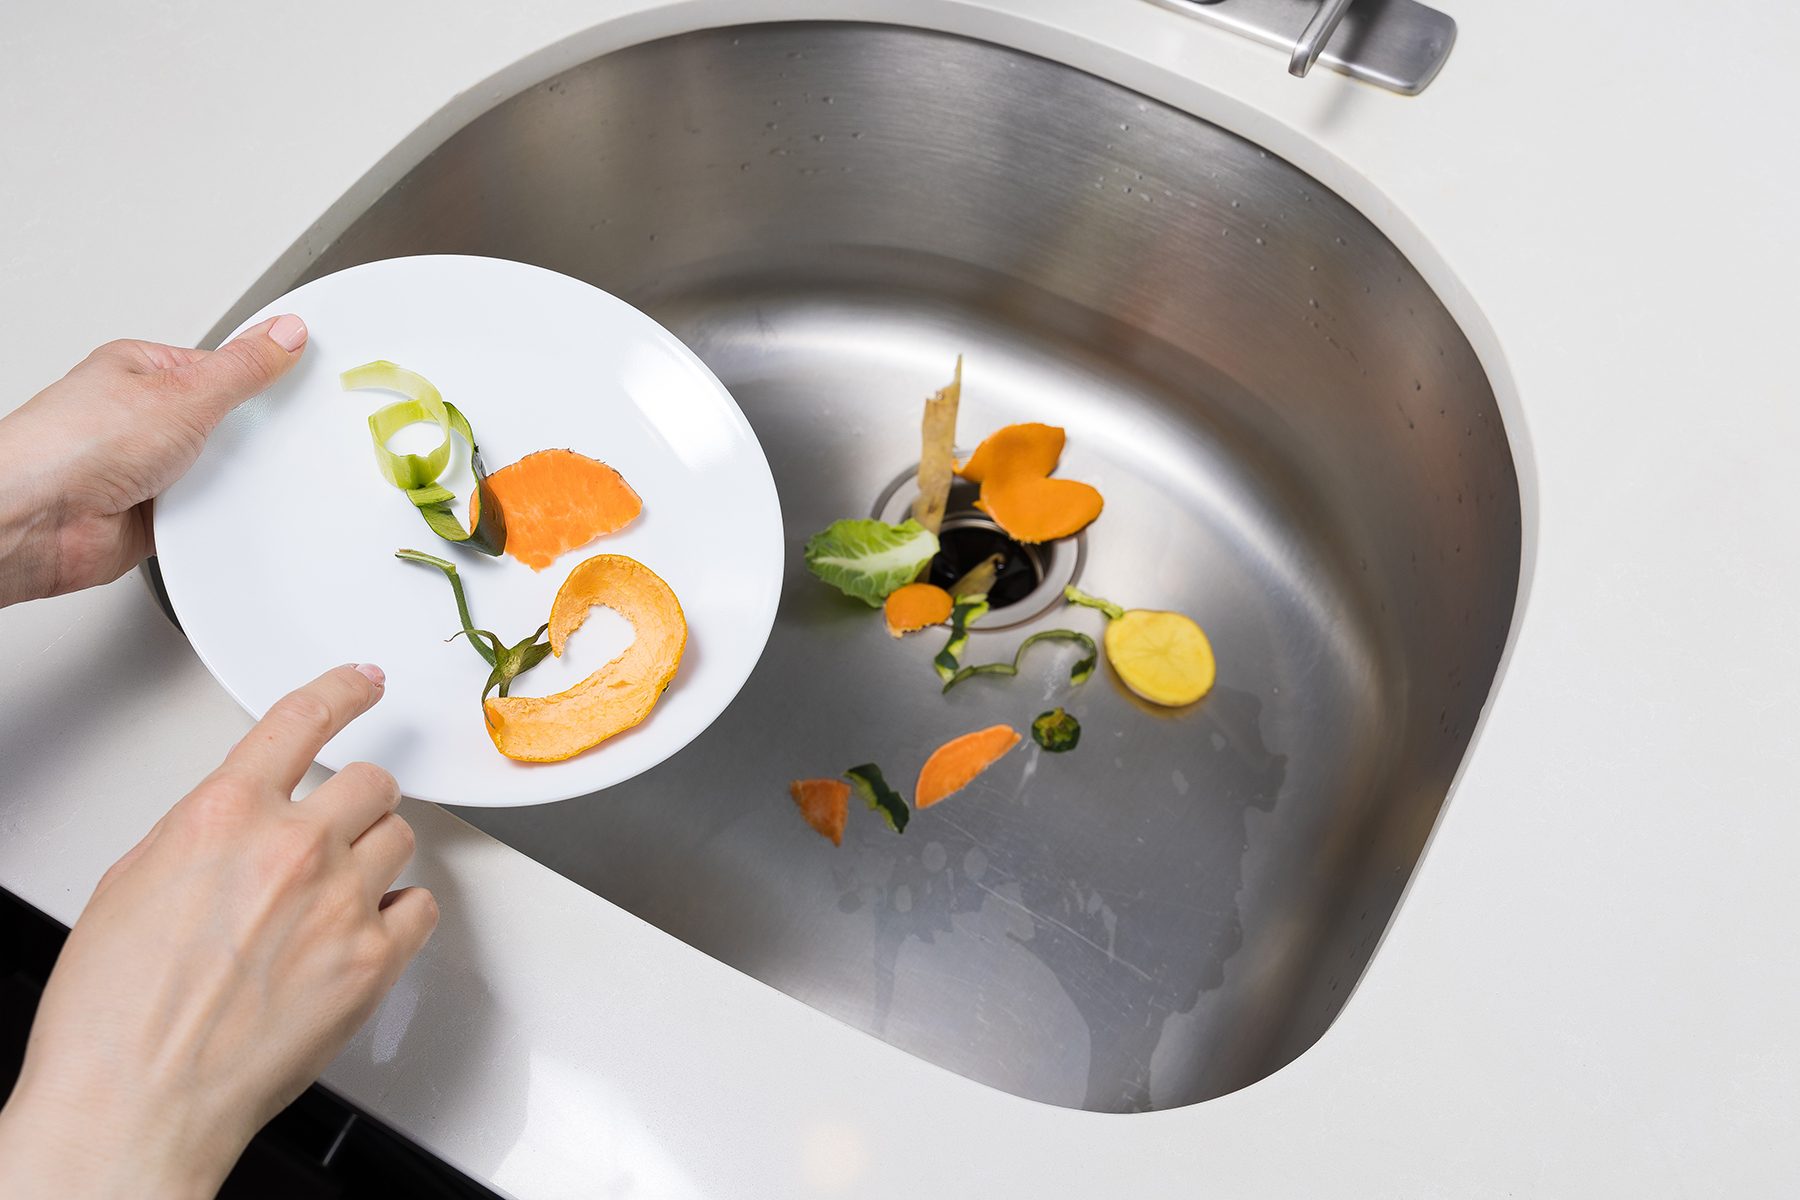 Are You Using Your Garbage Disposal Correctly? Here's the Deal